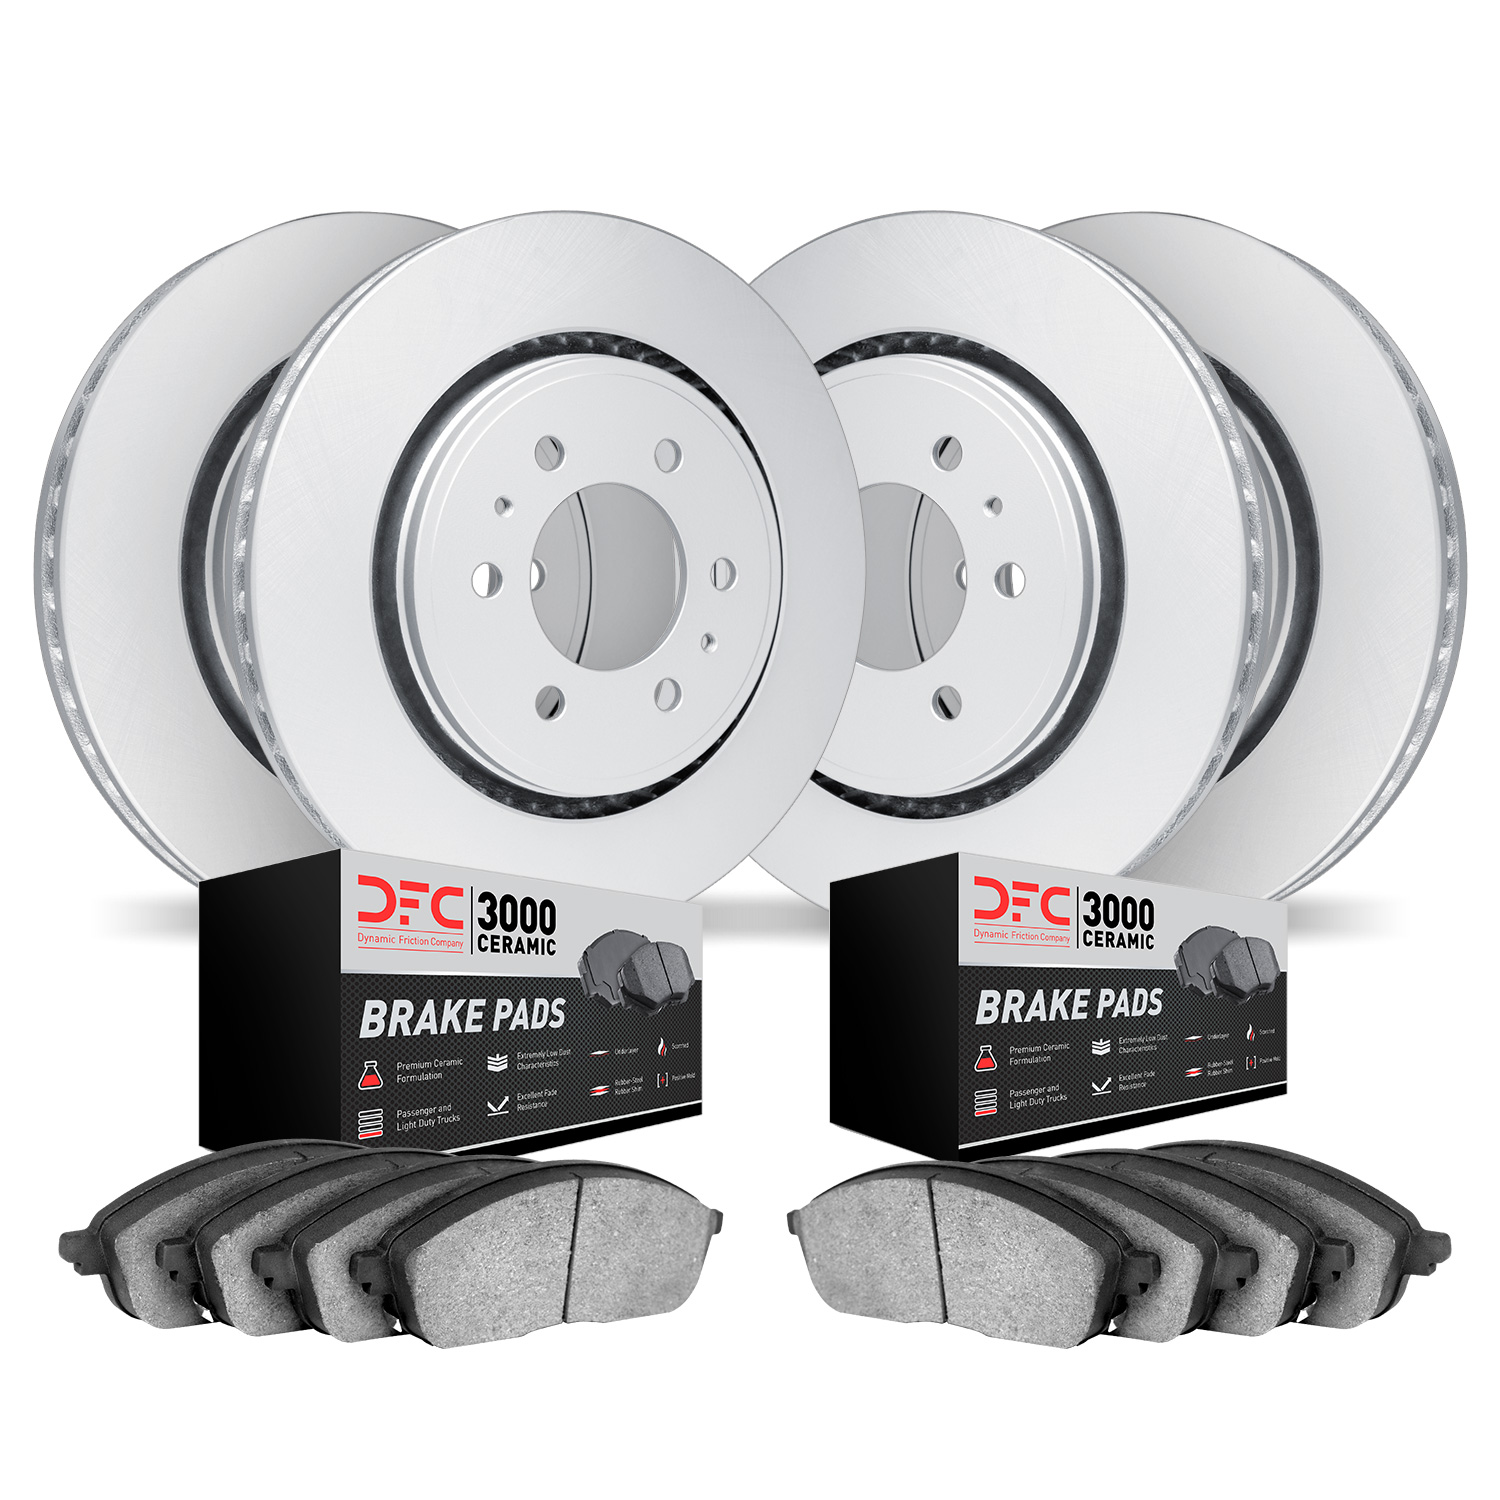 4304-76036 Geospec Brake Rotors with 3000-Series Ceramic Brake Pads Kit, 2003-2009 Lexus/Toyota/Scion, Position: Front and Rear